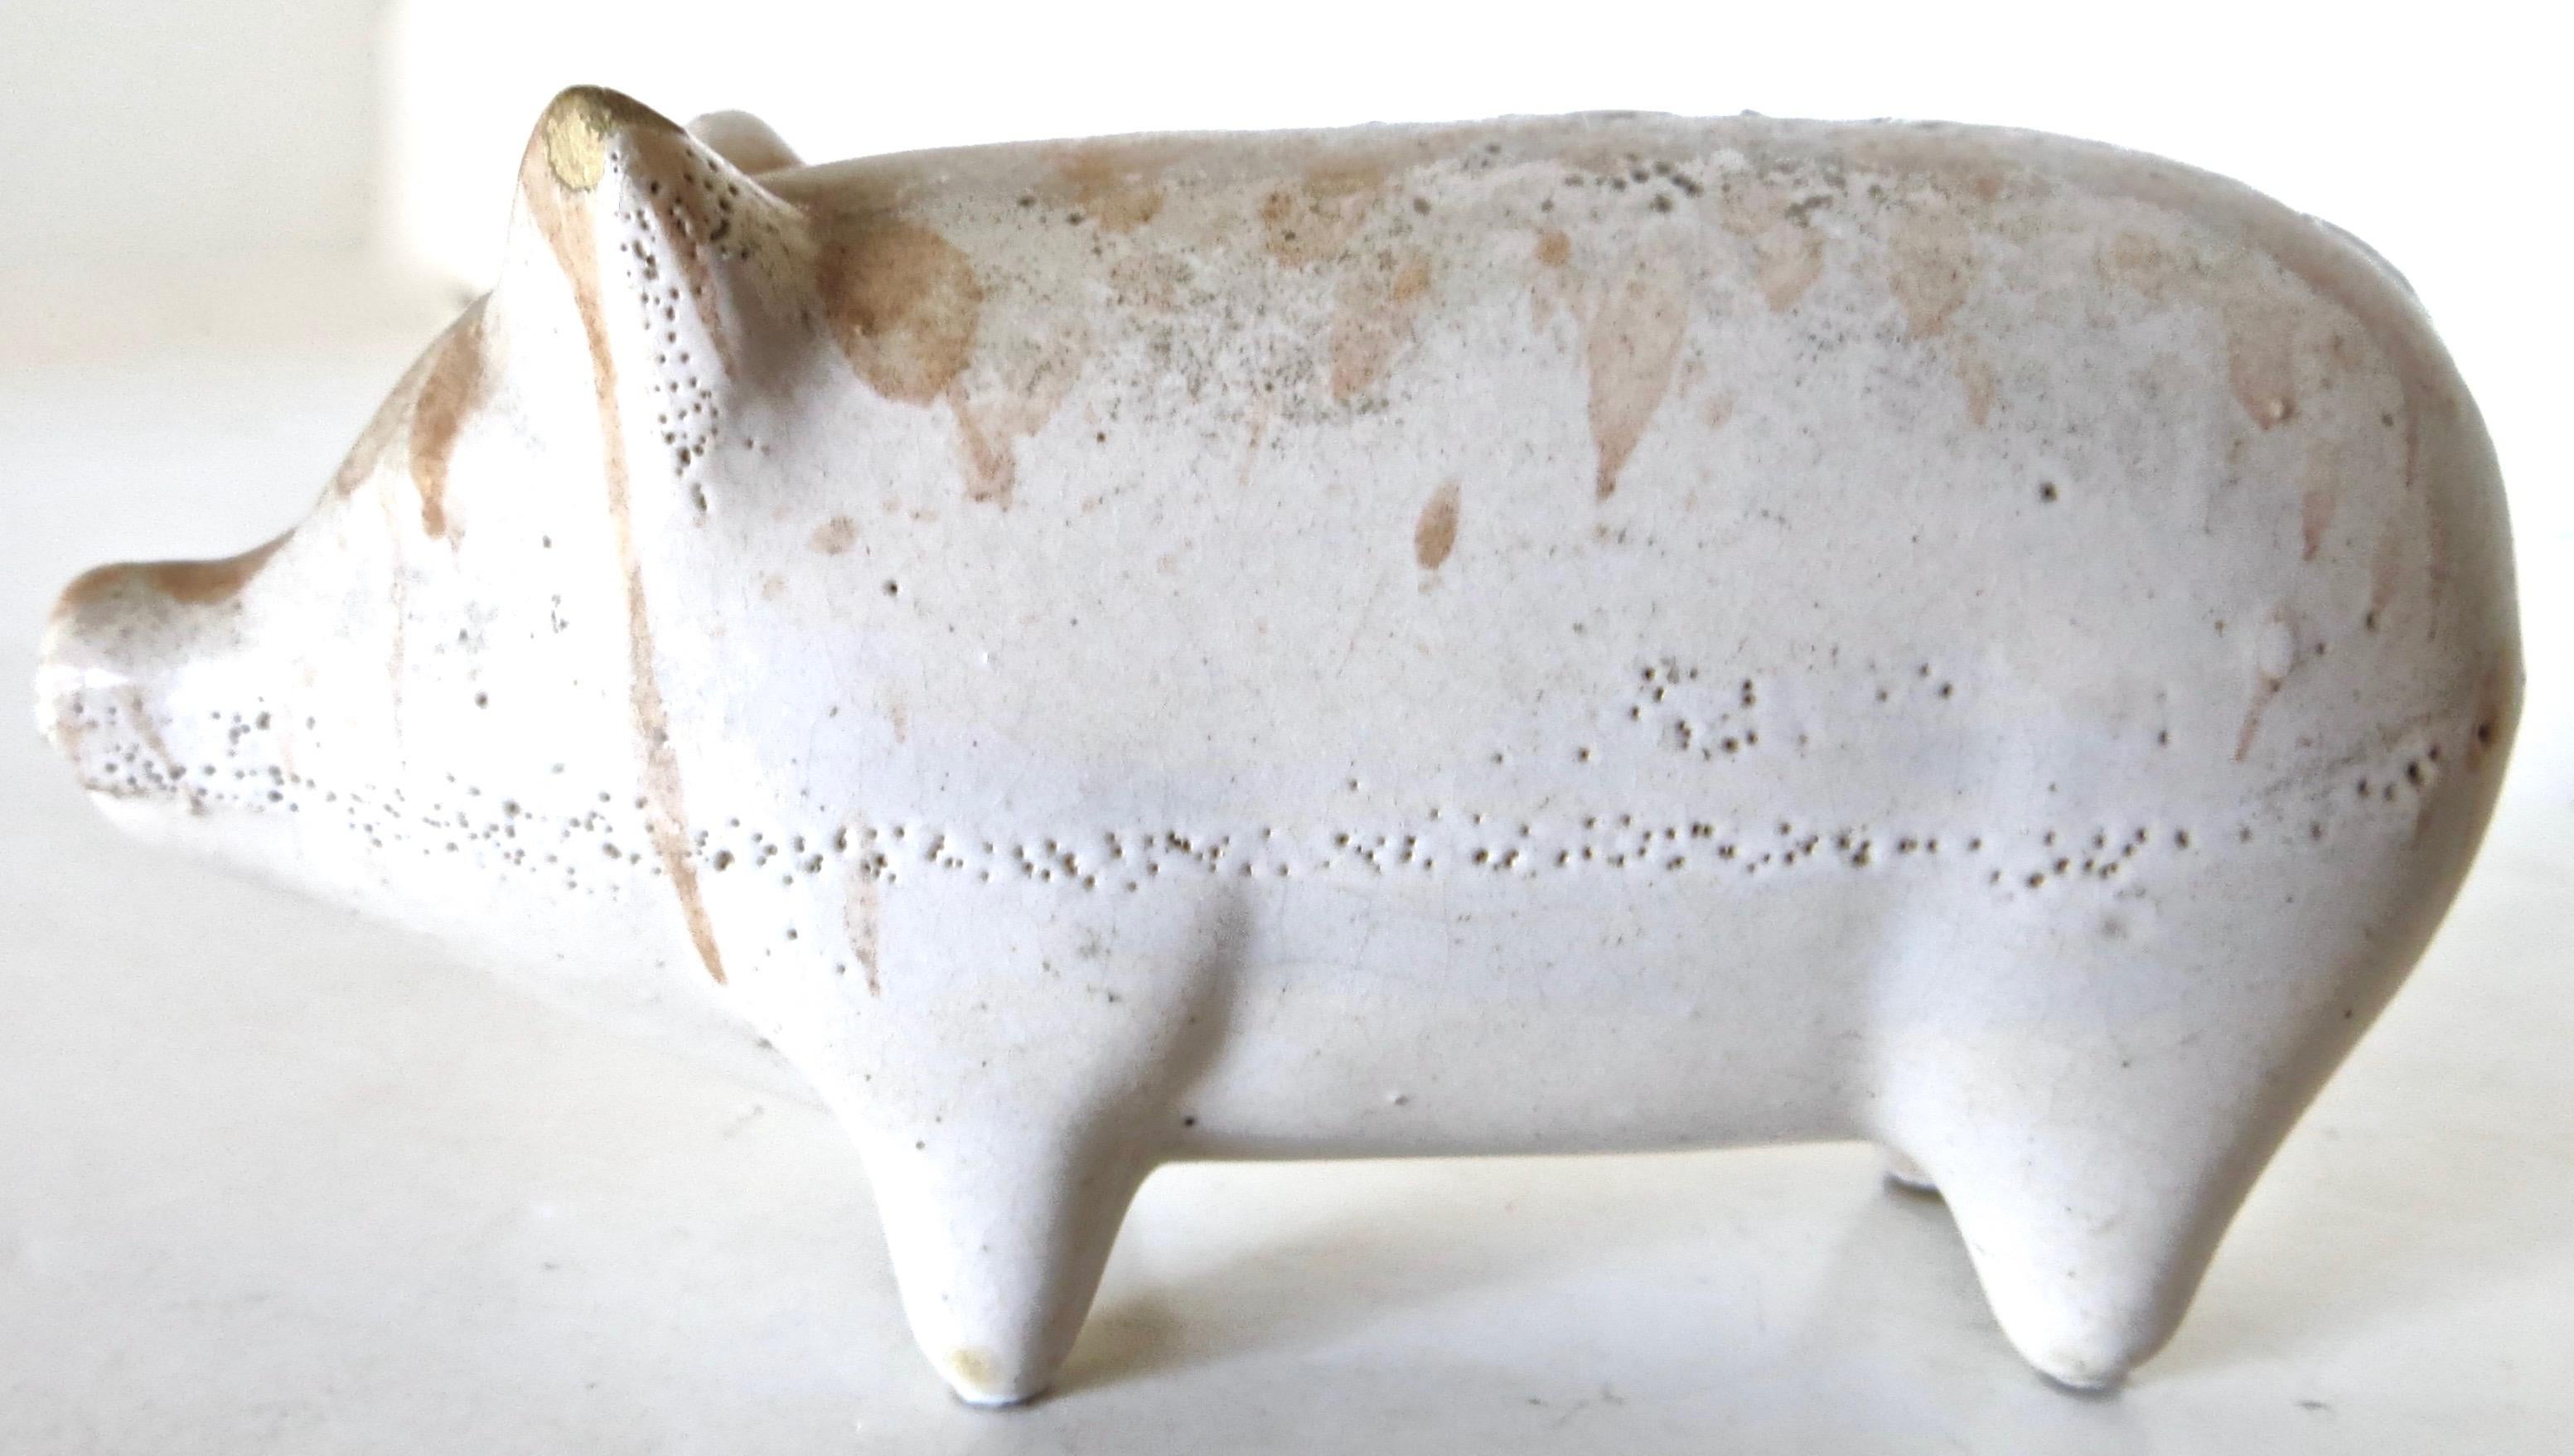 American pottery still bank in the shape of a pig, used for saving coins (usually pennies) to encourage children the importance of thrift. Pottery still banks are somewhat scarce since the typical way to remove coins was to smash the bank open,